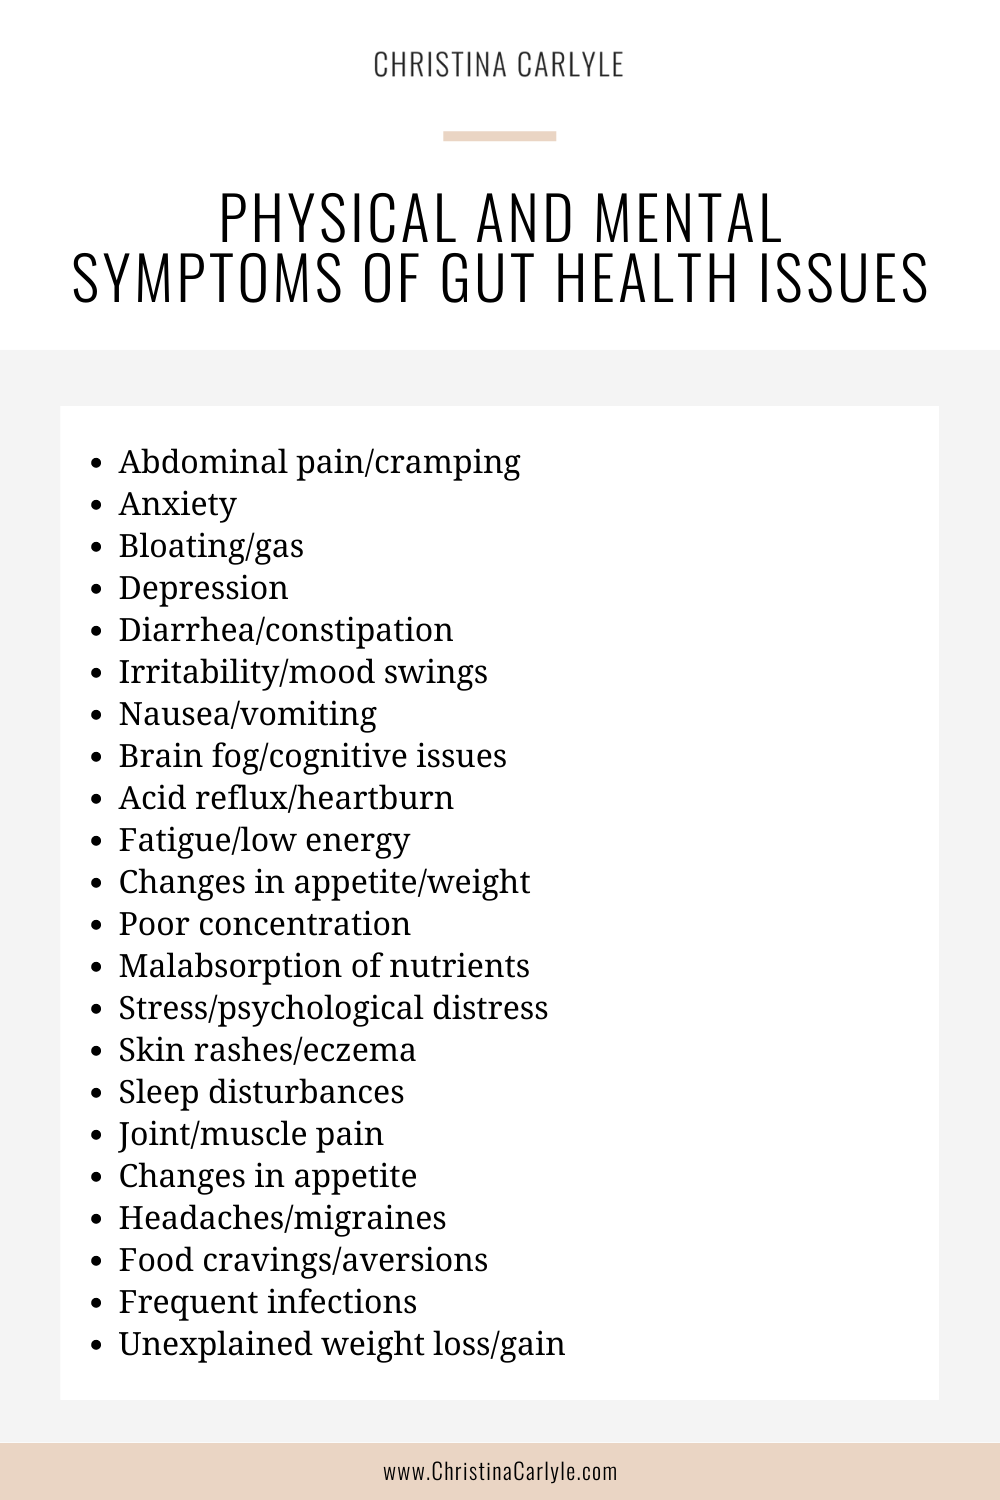 Symptoms of gut health issues and signs you need more prebiotics